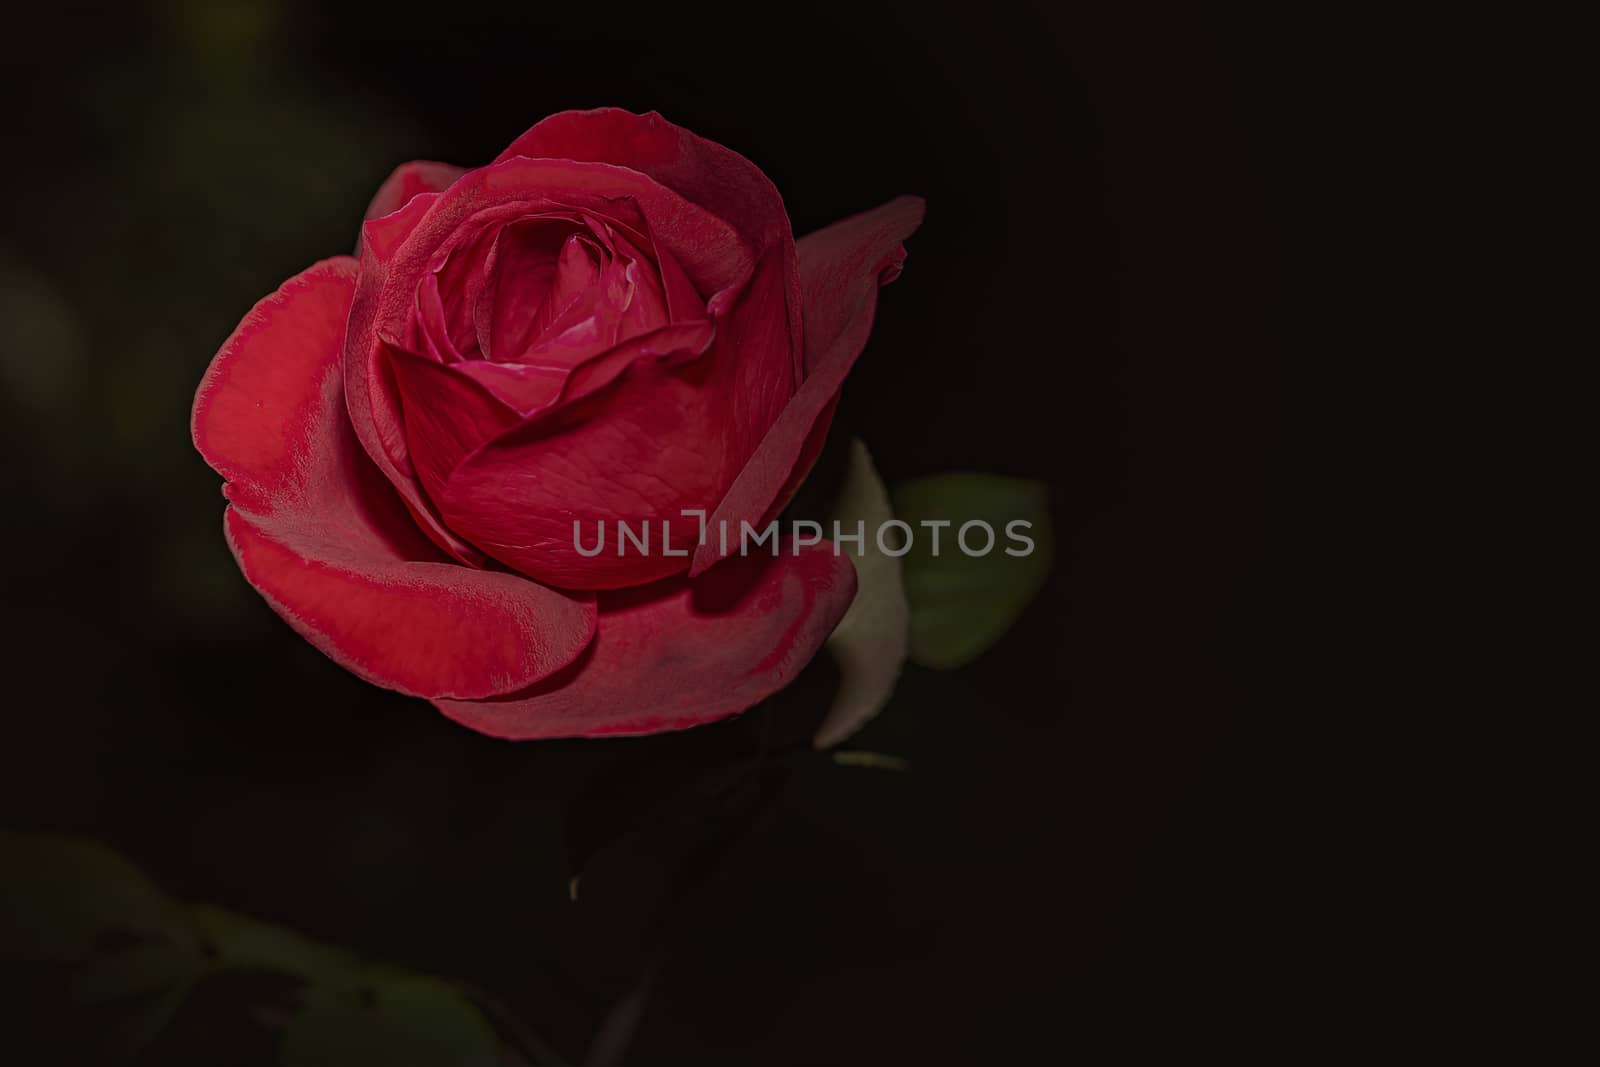 Velverty petals of a red rose under a soft light